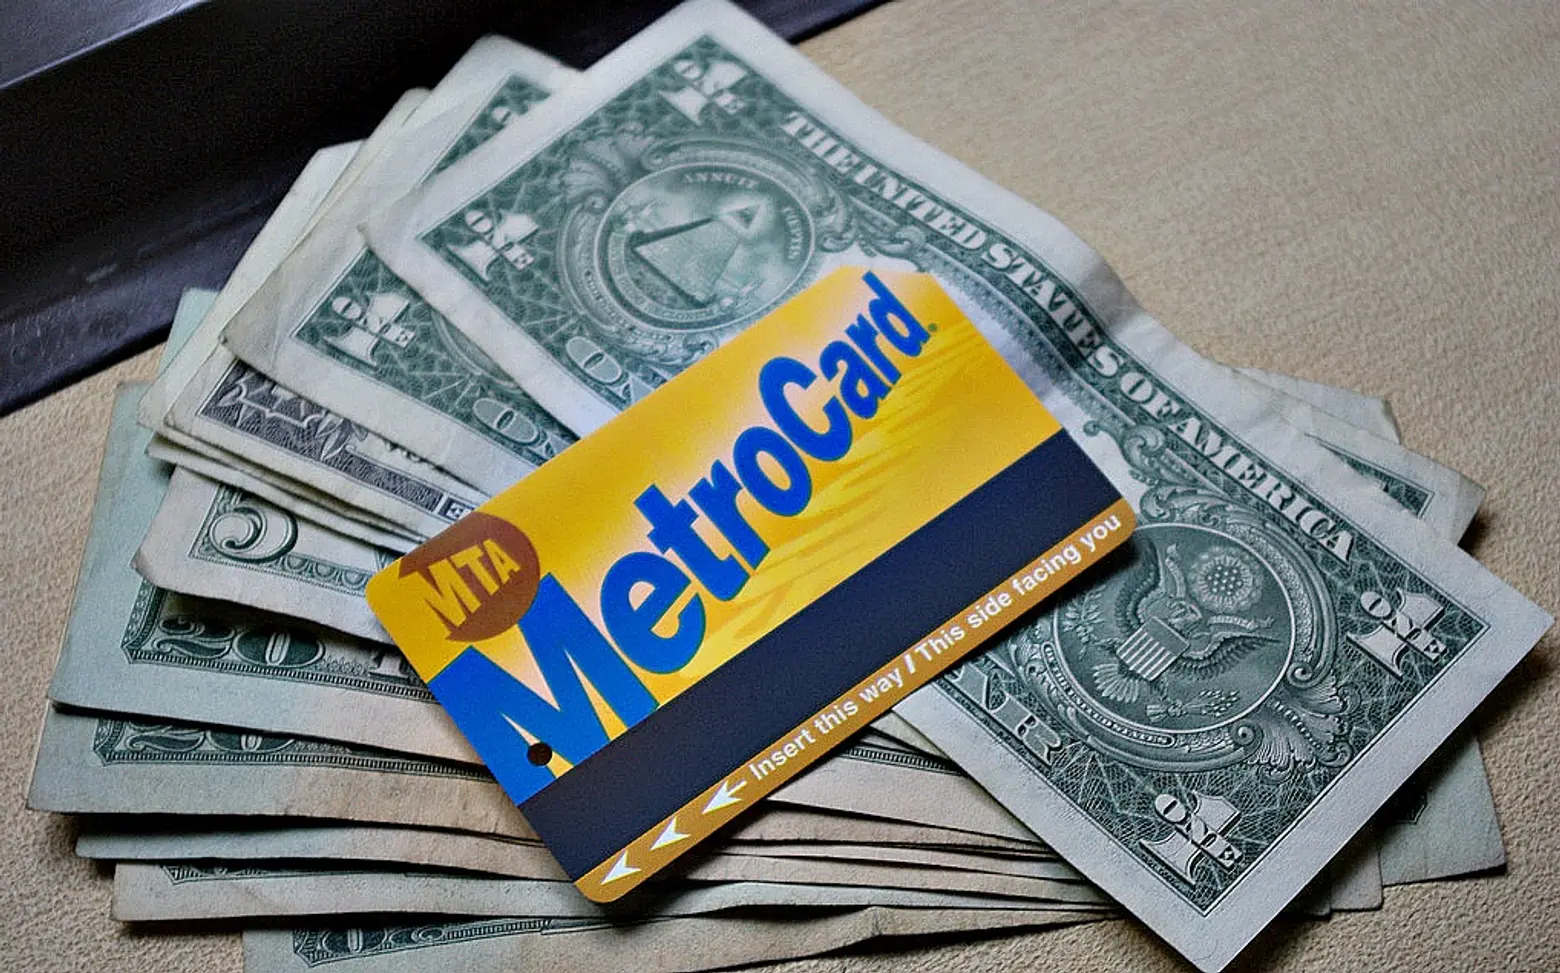 MTA approves discounted MetroCards for 7- and 30-day passes only